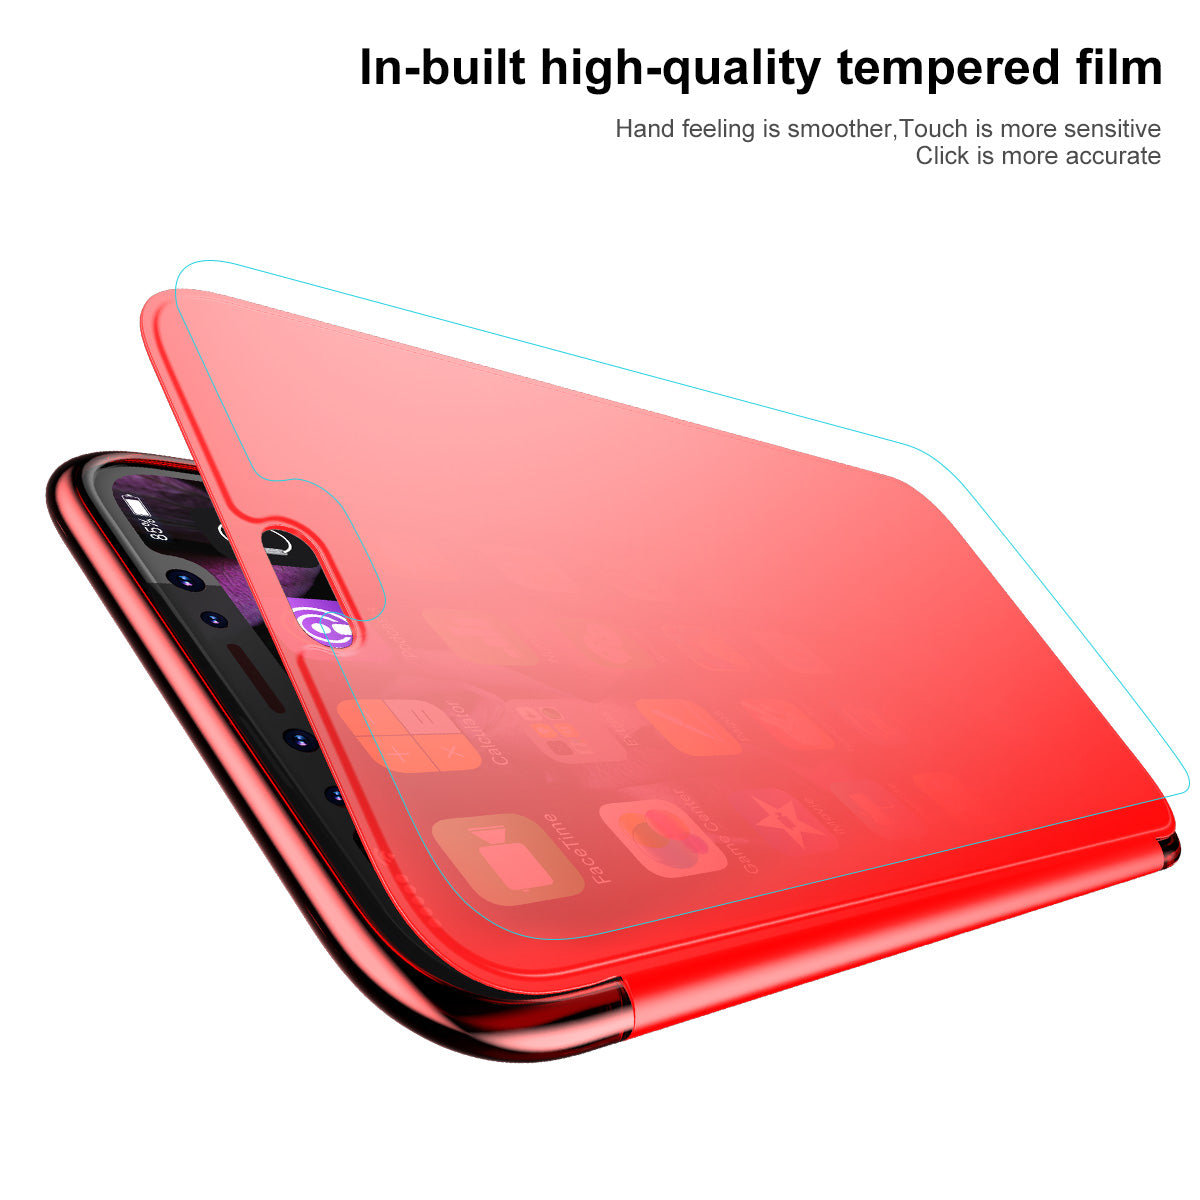 iPhone-X-Baseus-Touchable-Case-Red-Tempered_RZL0Y5ACS0AC.jpg